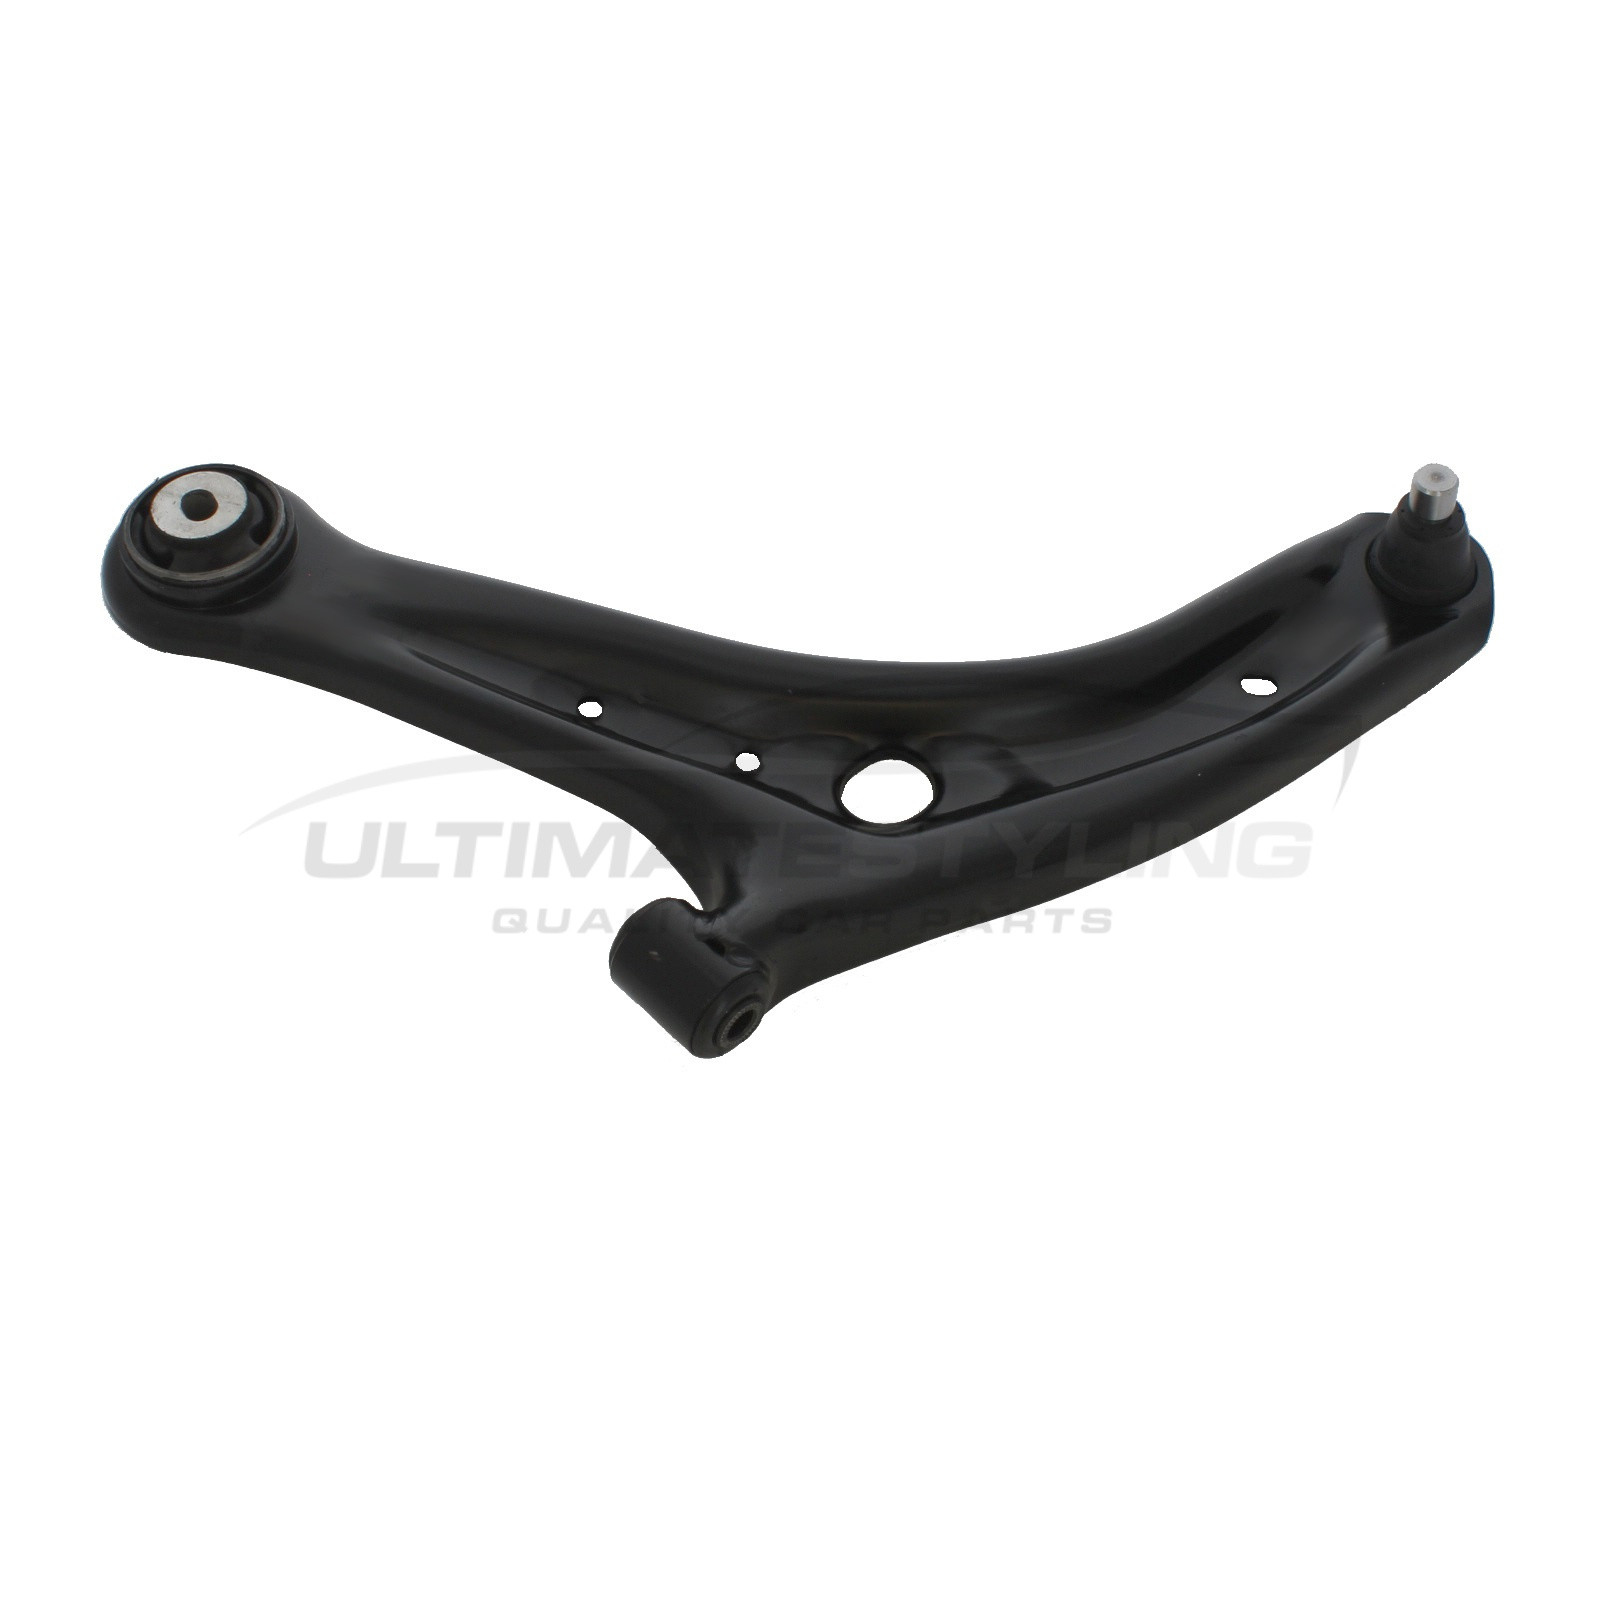 Ford Fiesta 2008-2018, Ford Ka+ 2016-2020, Ford Ka+ Active 2018-2020, Mazda 2 2007-2015 Front Lower Suspension Arm (Steel) Including Ball Joint and Rear Bush Passenger Side (LH)